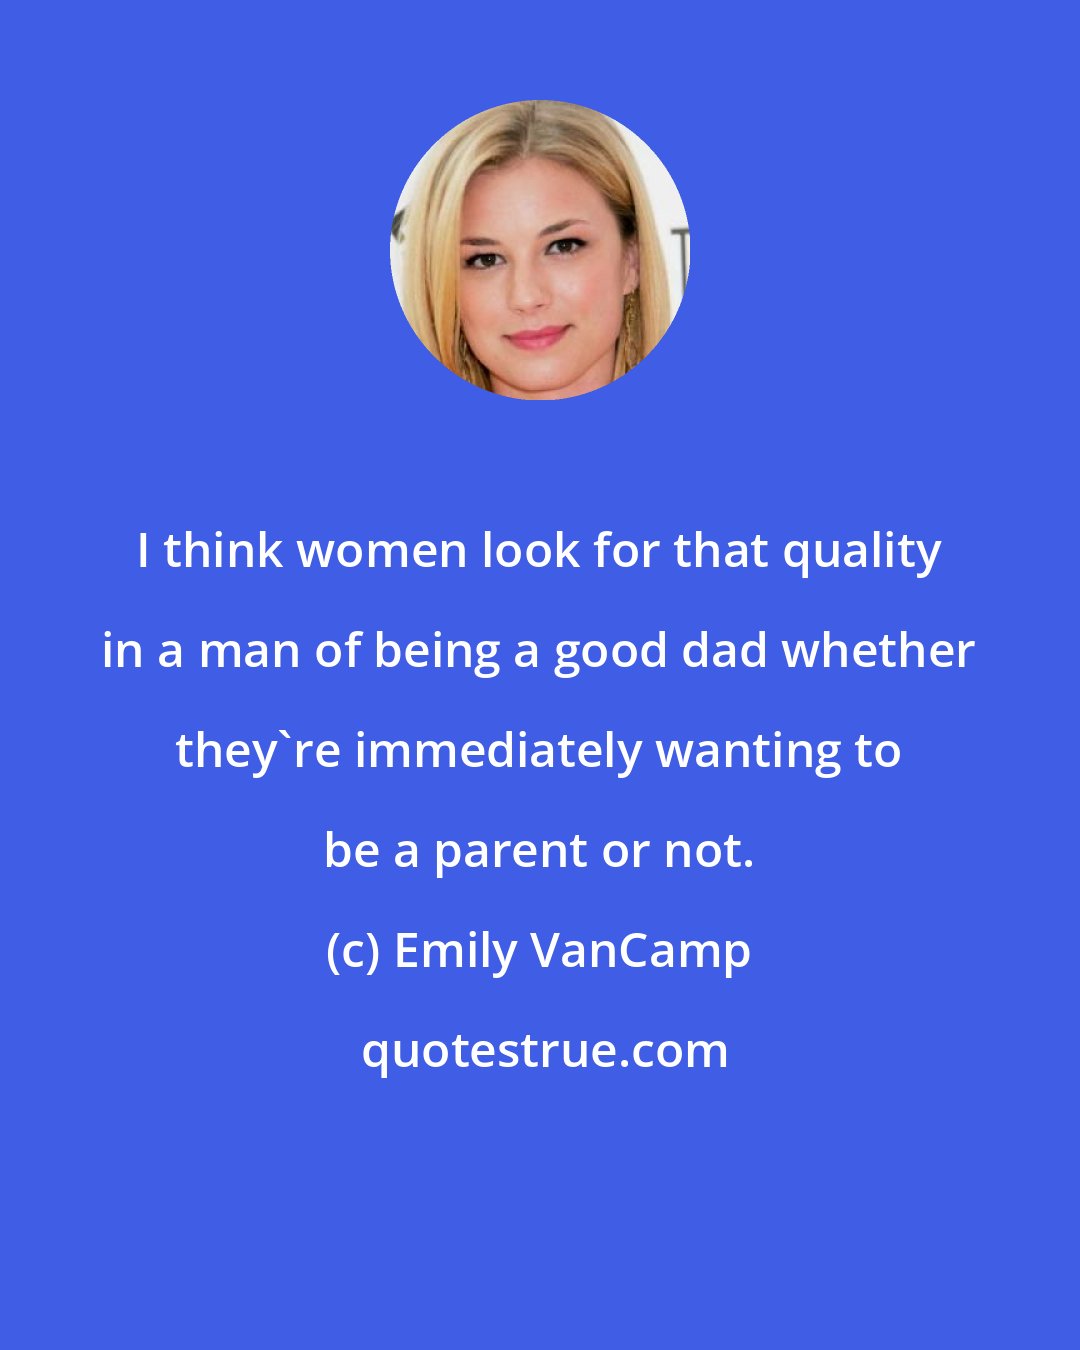 Emily VanCamp: I think women look for that quality in a man of being a good dad whether they're immediately wanting to be a parent or not.